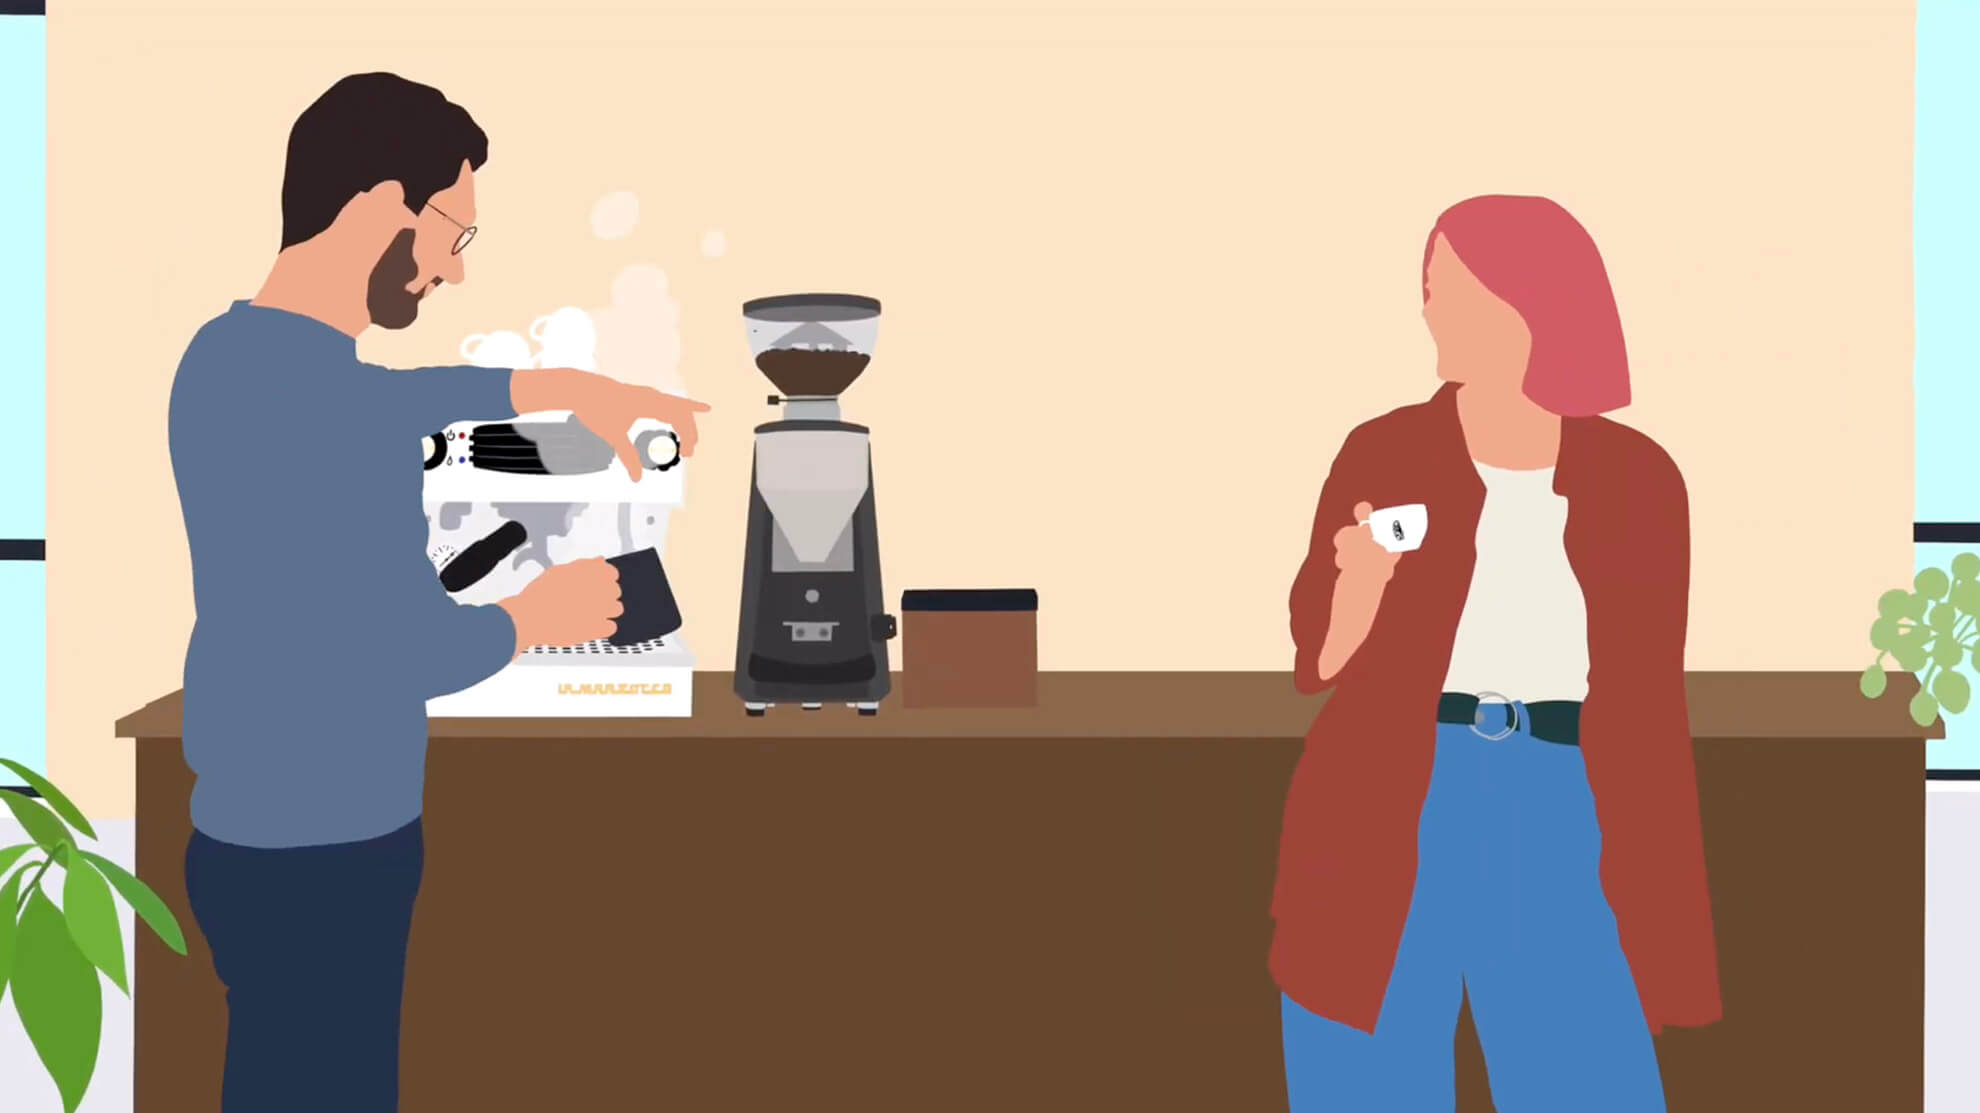 Painting of a man steaming milk on a one group espresso machine. Next to him an espresso grinder and a knock box, as well as a woman drinking espresso.